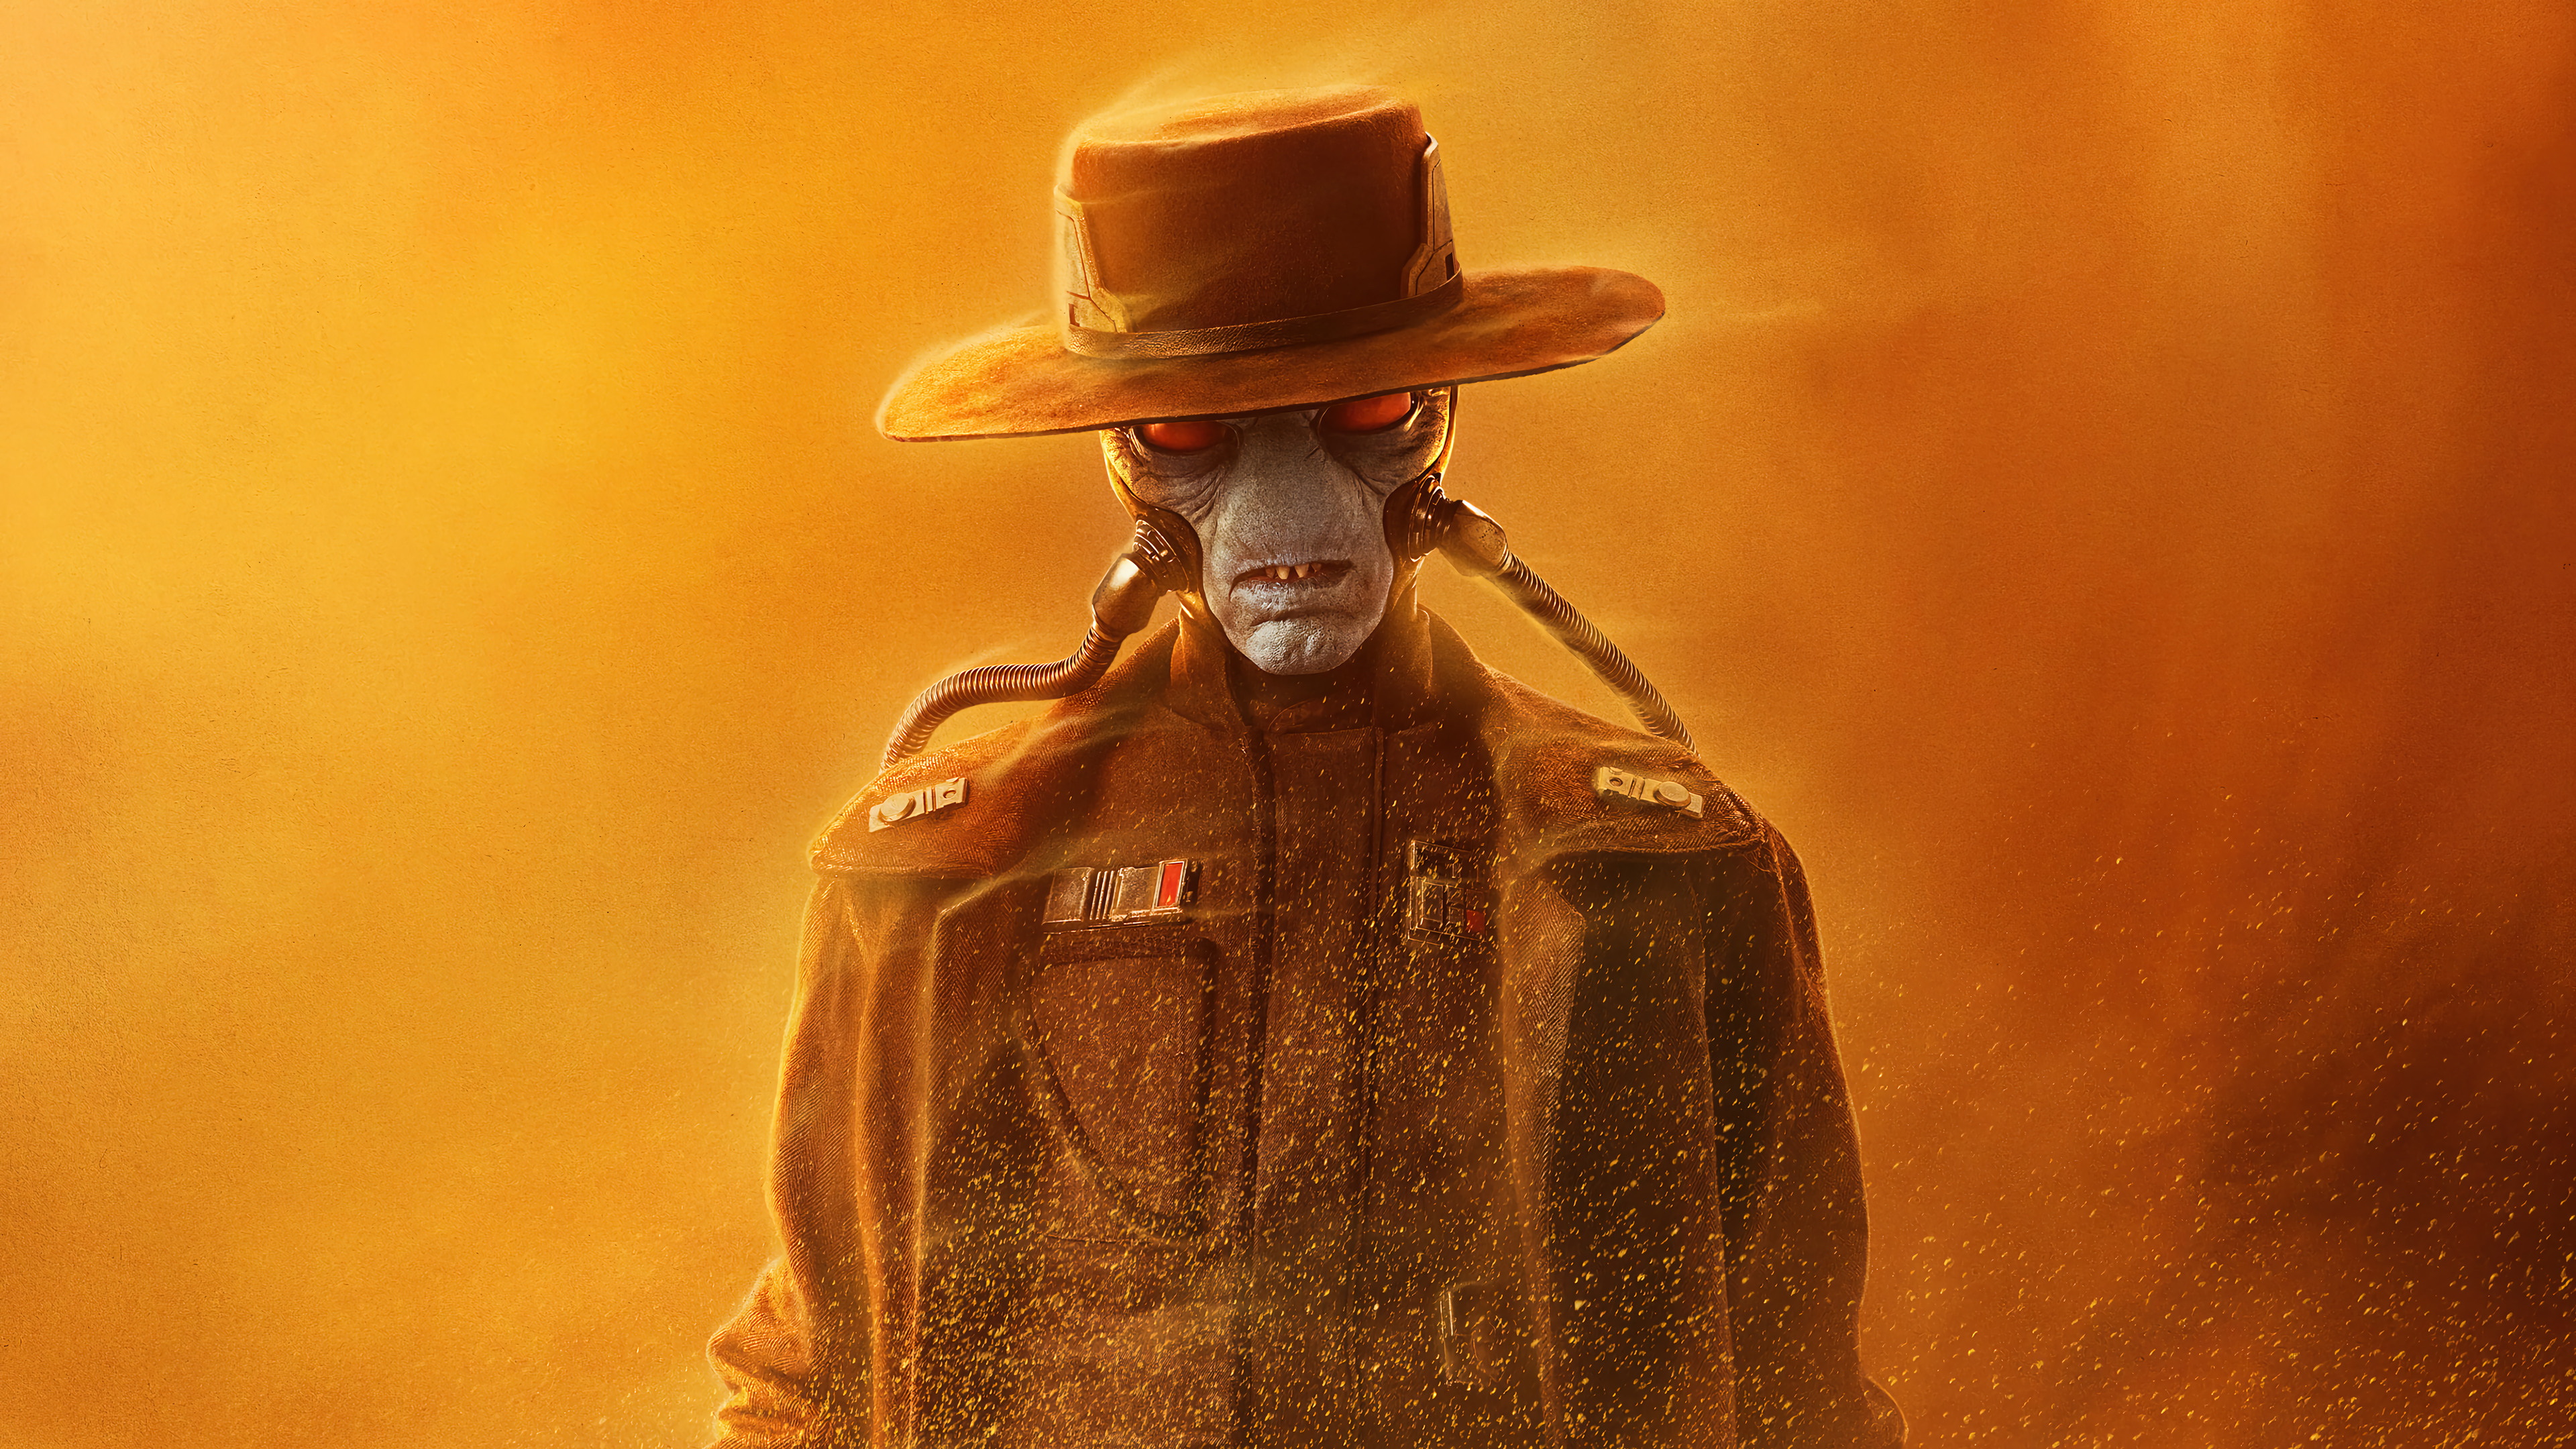 cad bane, tv show, the book of boba fett, star wars